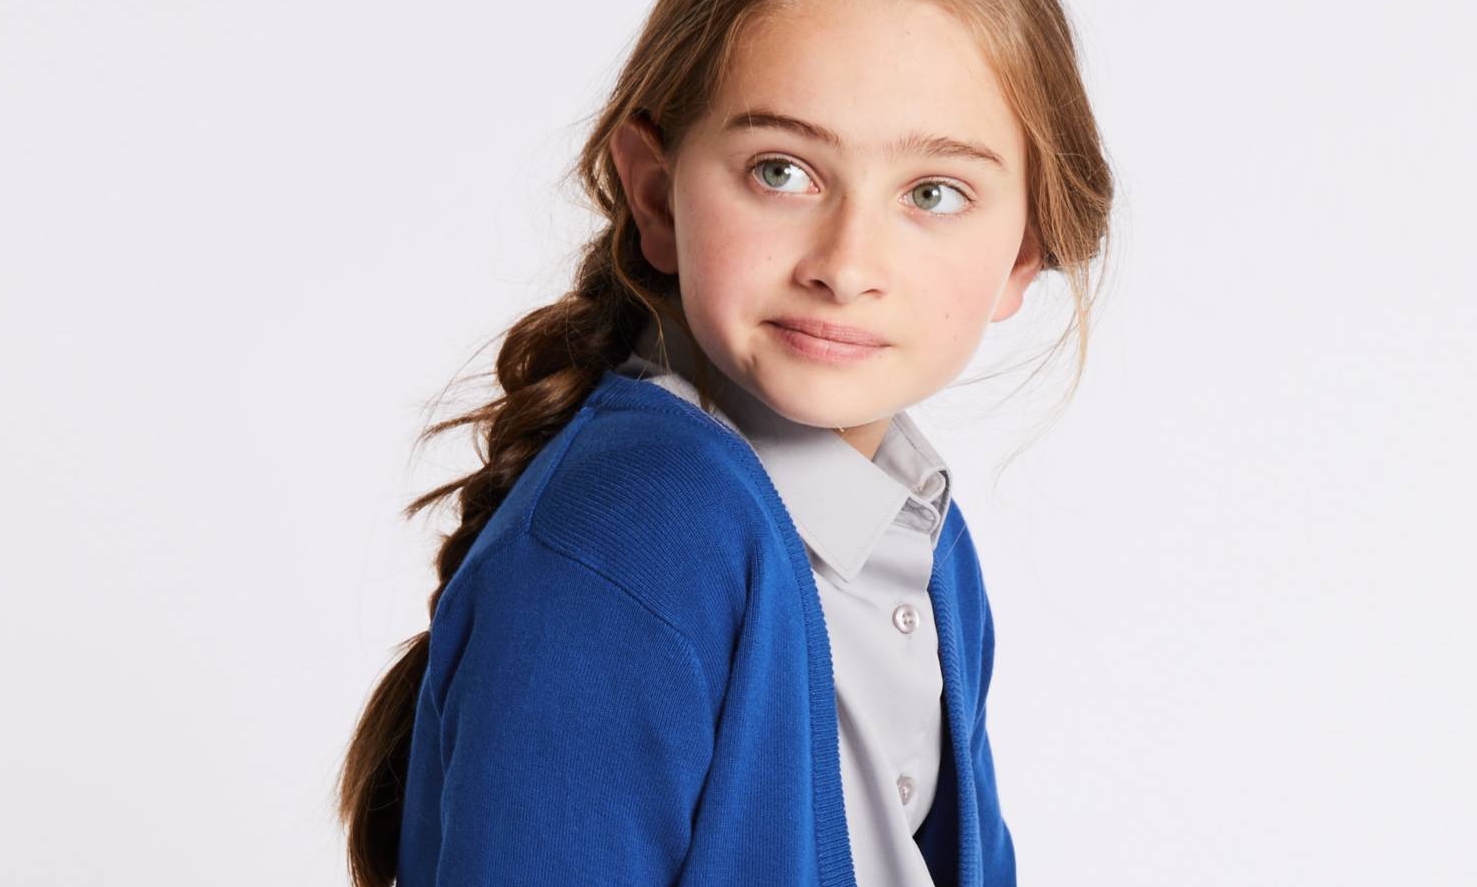 M&S are doing an amazing deal on school uniforms right now – but you better hurry